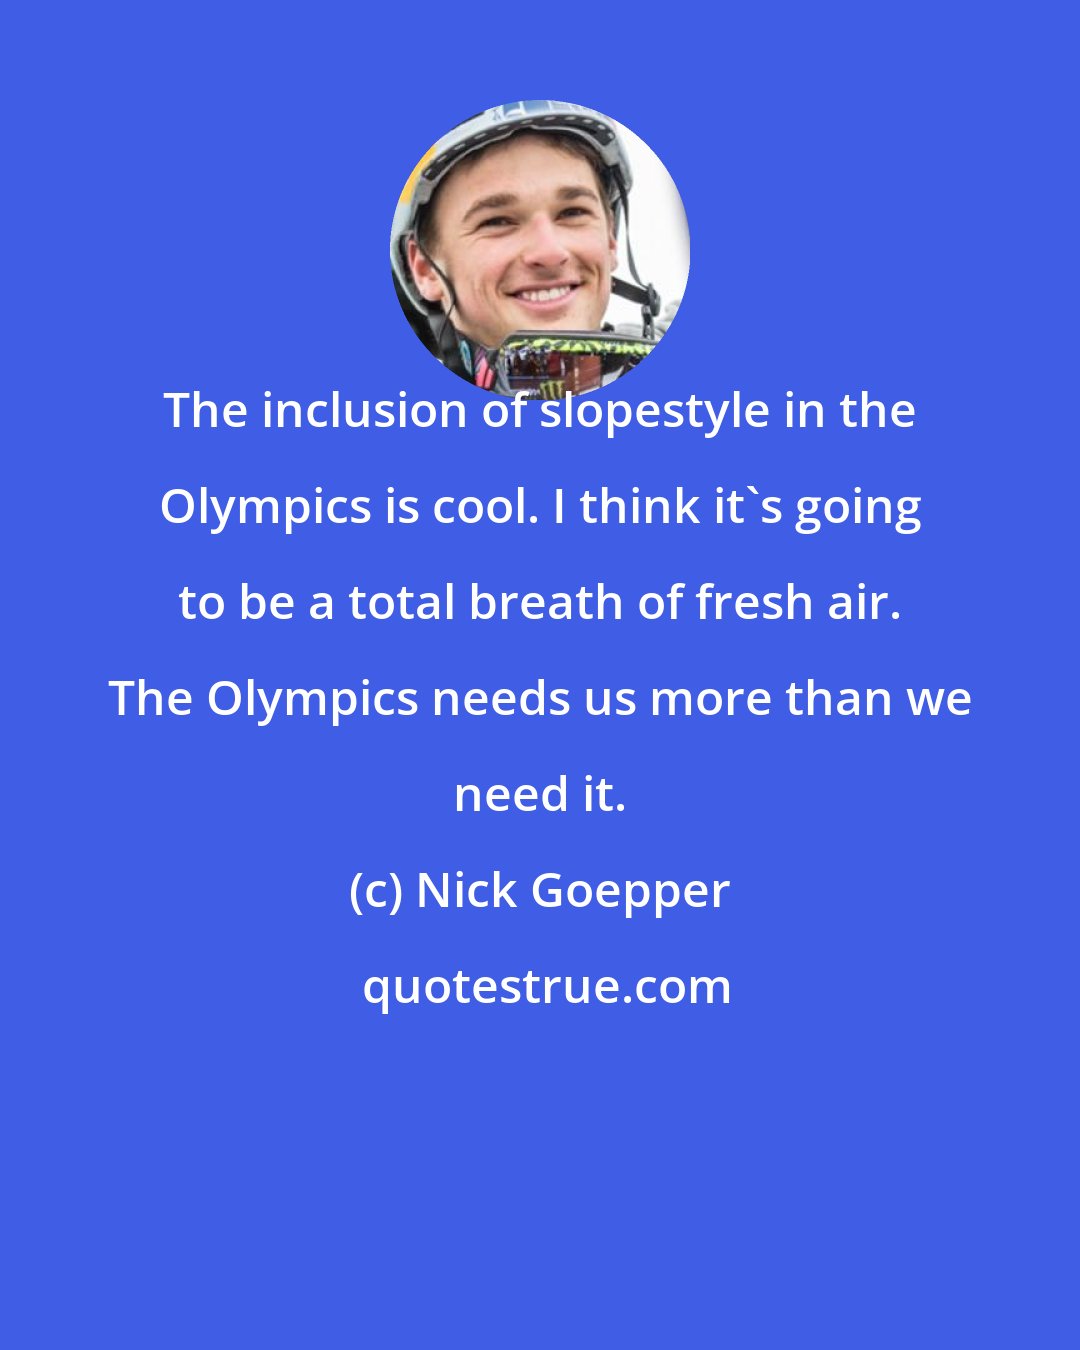 Nick Goepper: The inclusion of slopestyle in the Olympics is cool. I think it's going to be a total breath of fresh air. The Olympics needs us more than we need it.